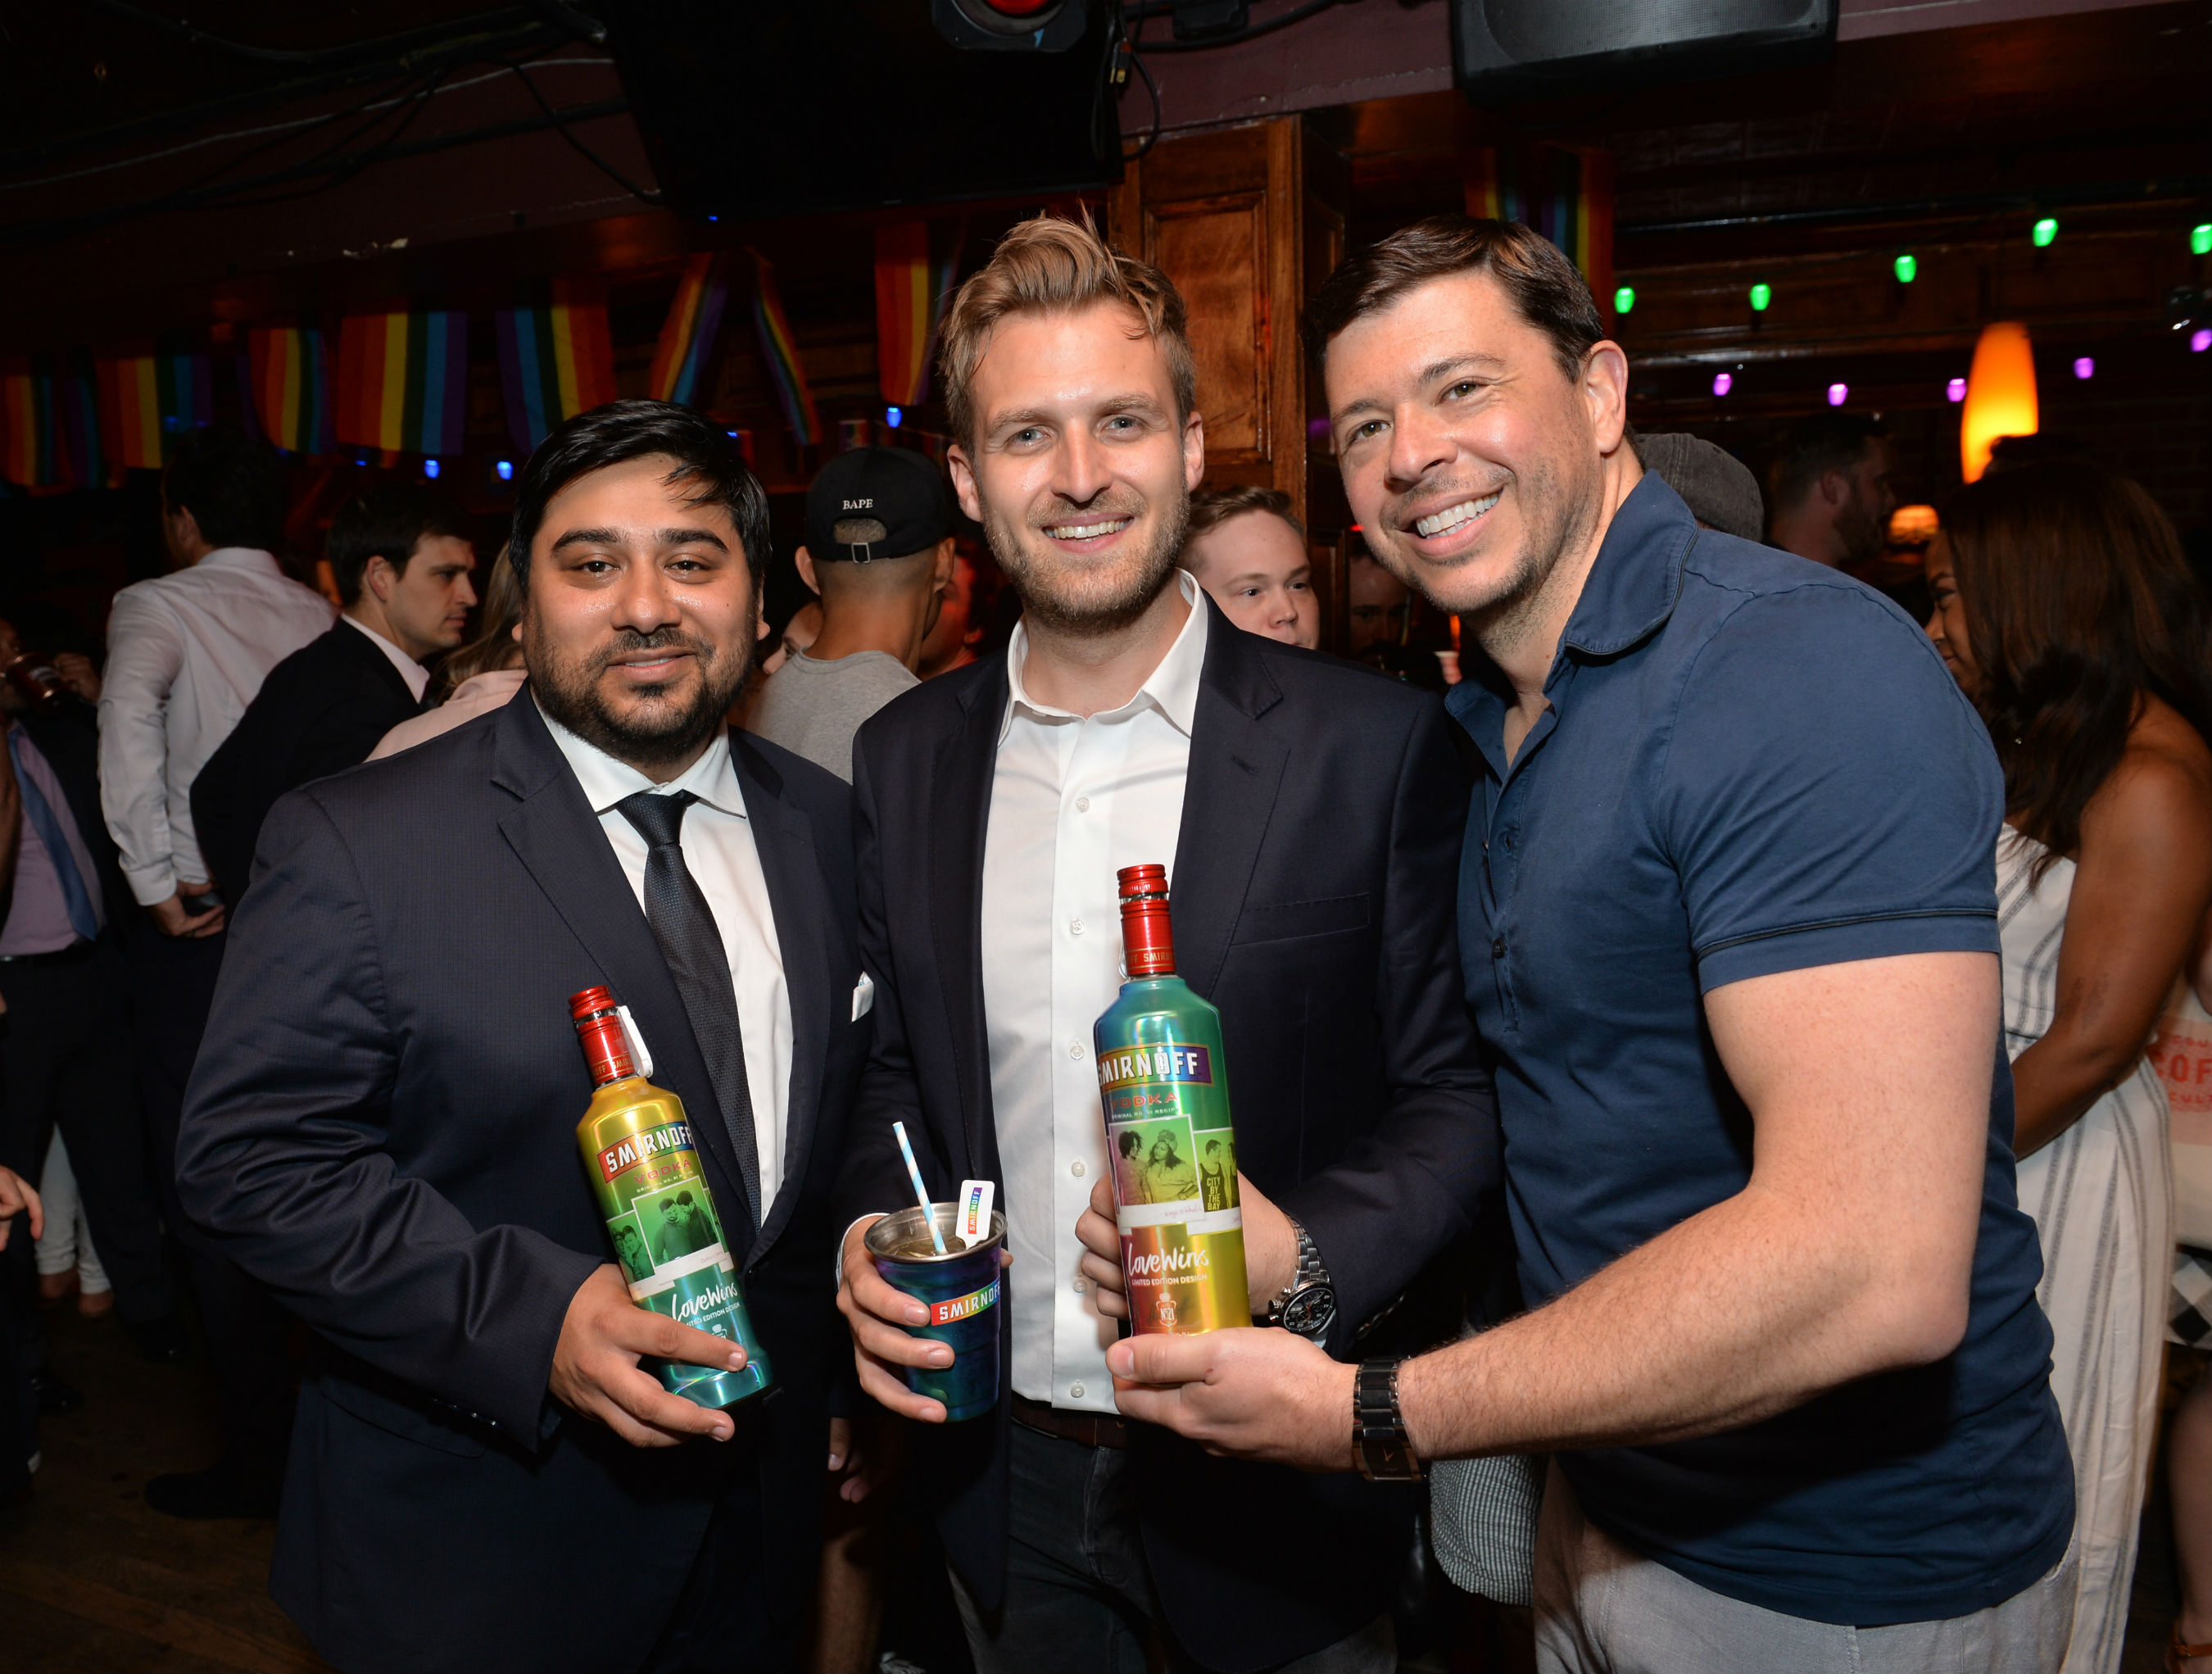 Vice President of SMIRNOFF Jay Sethi, SMIRNOFF Brand Manager Jamie Young and Adam Marquez, Associate Director of Corporate Development for the Human Rights Campaign, announce the launch of SMIRNOFF No. 21 Vodka “Love Wins” limited edition bottles to celebrate inclusivity and love in all its forms in New York City on Thursday, May 18, 2017.